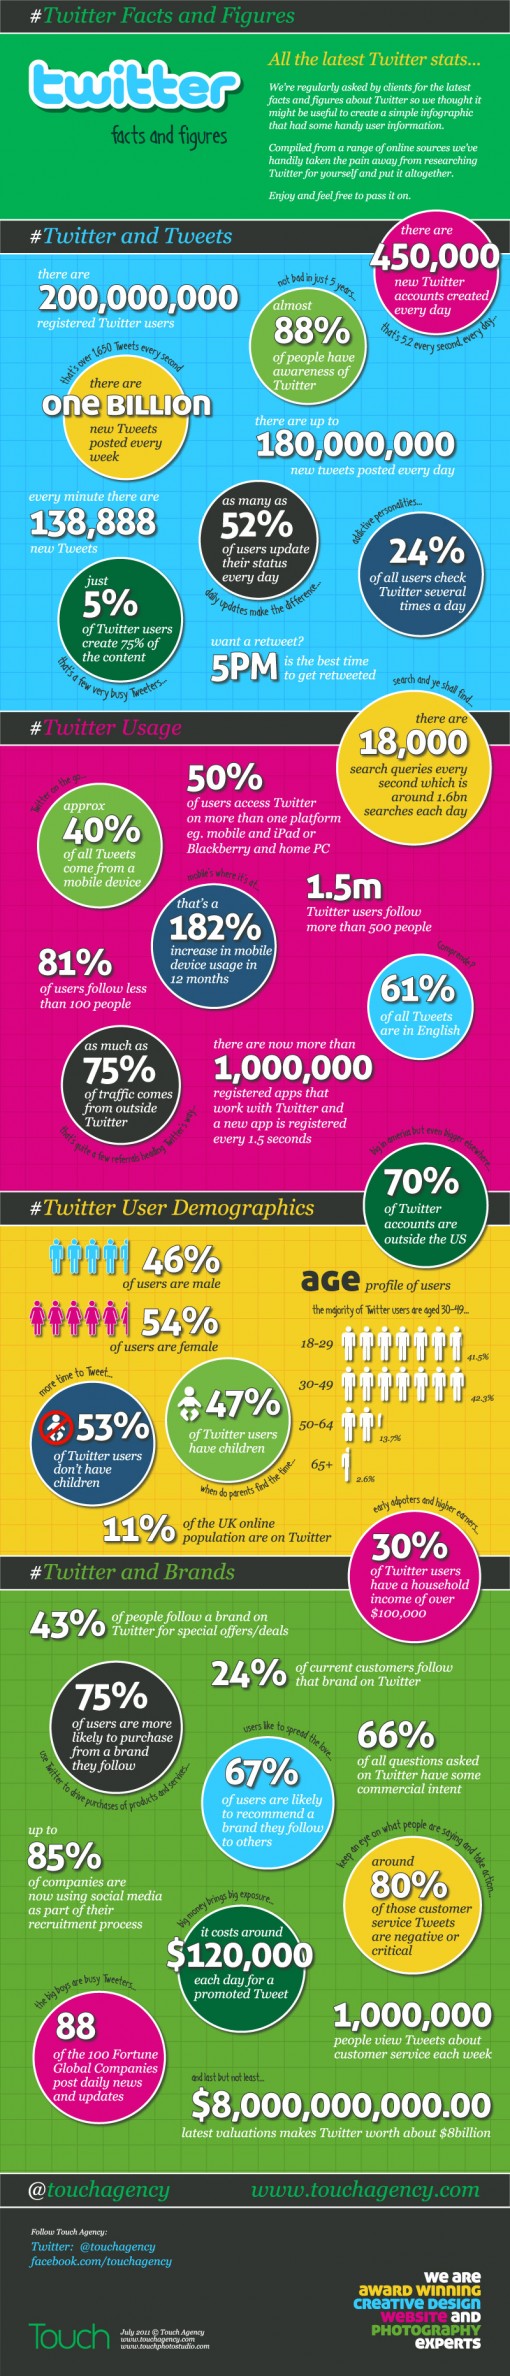 Twitter Stats Infographic